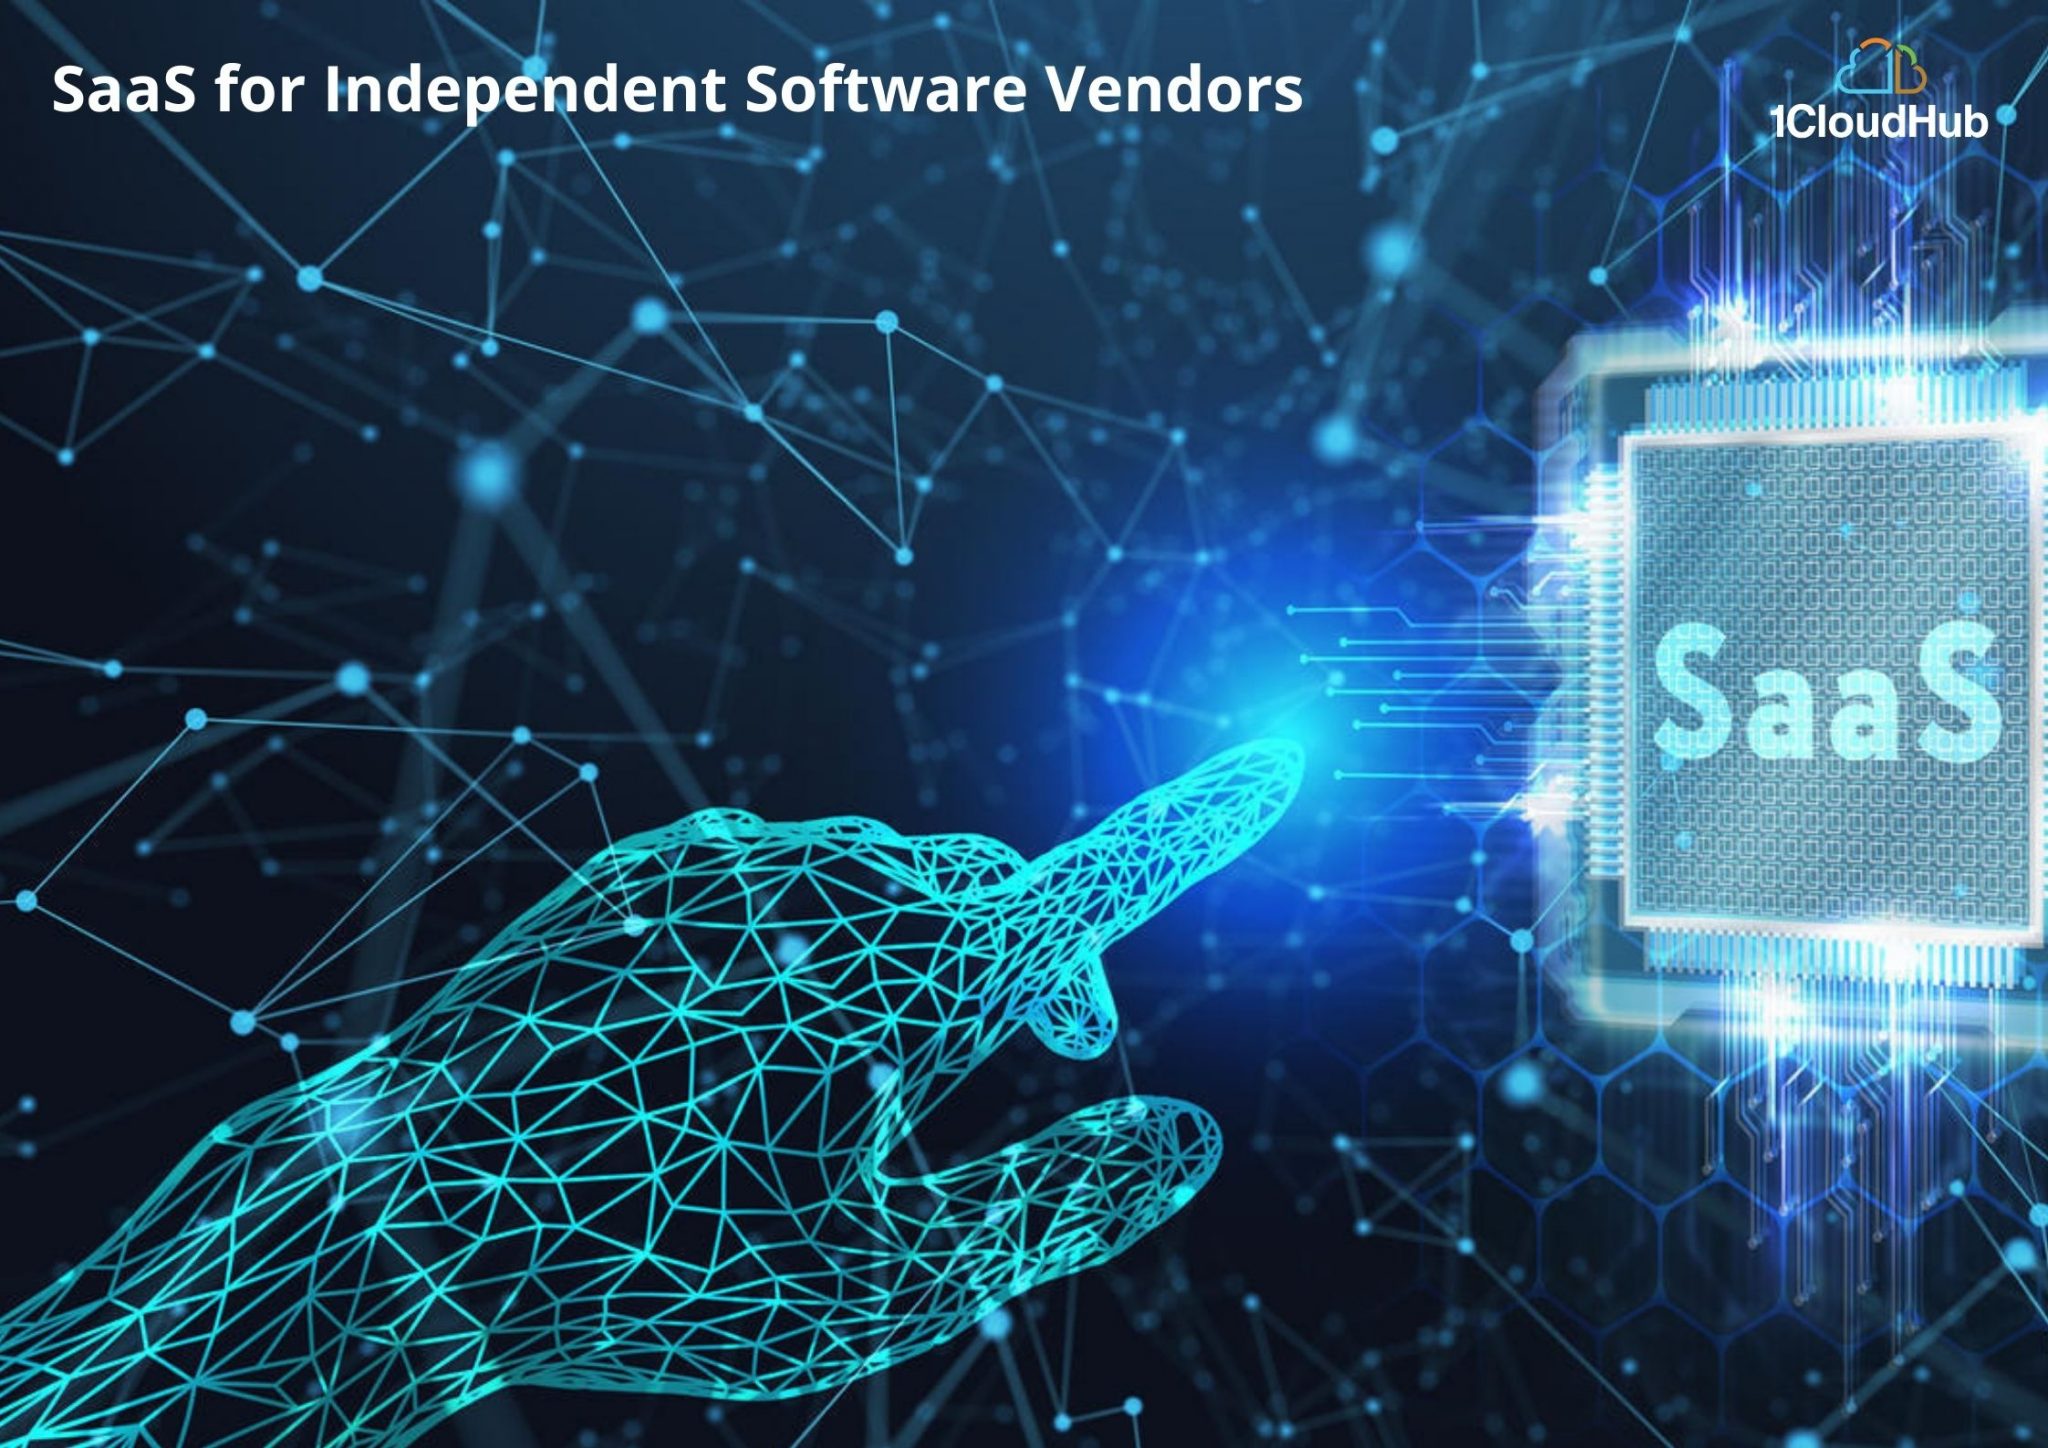 SaaS for Independent Software Vendors